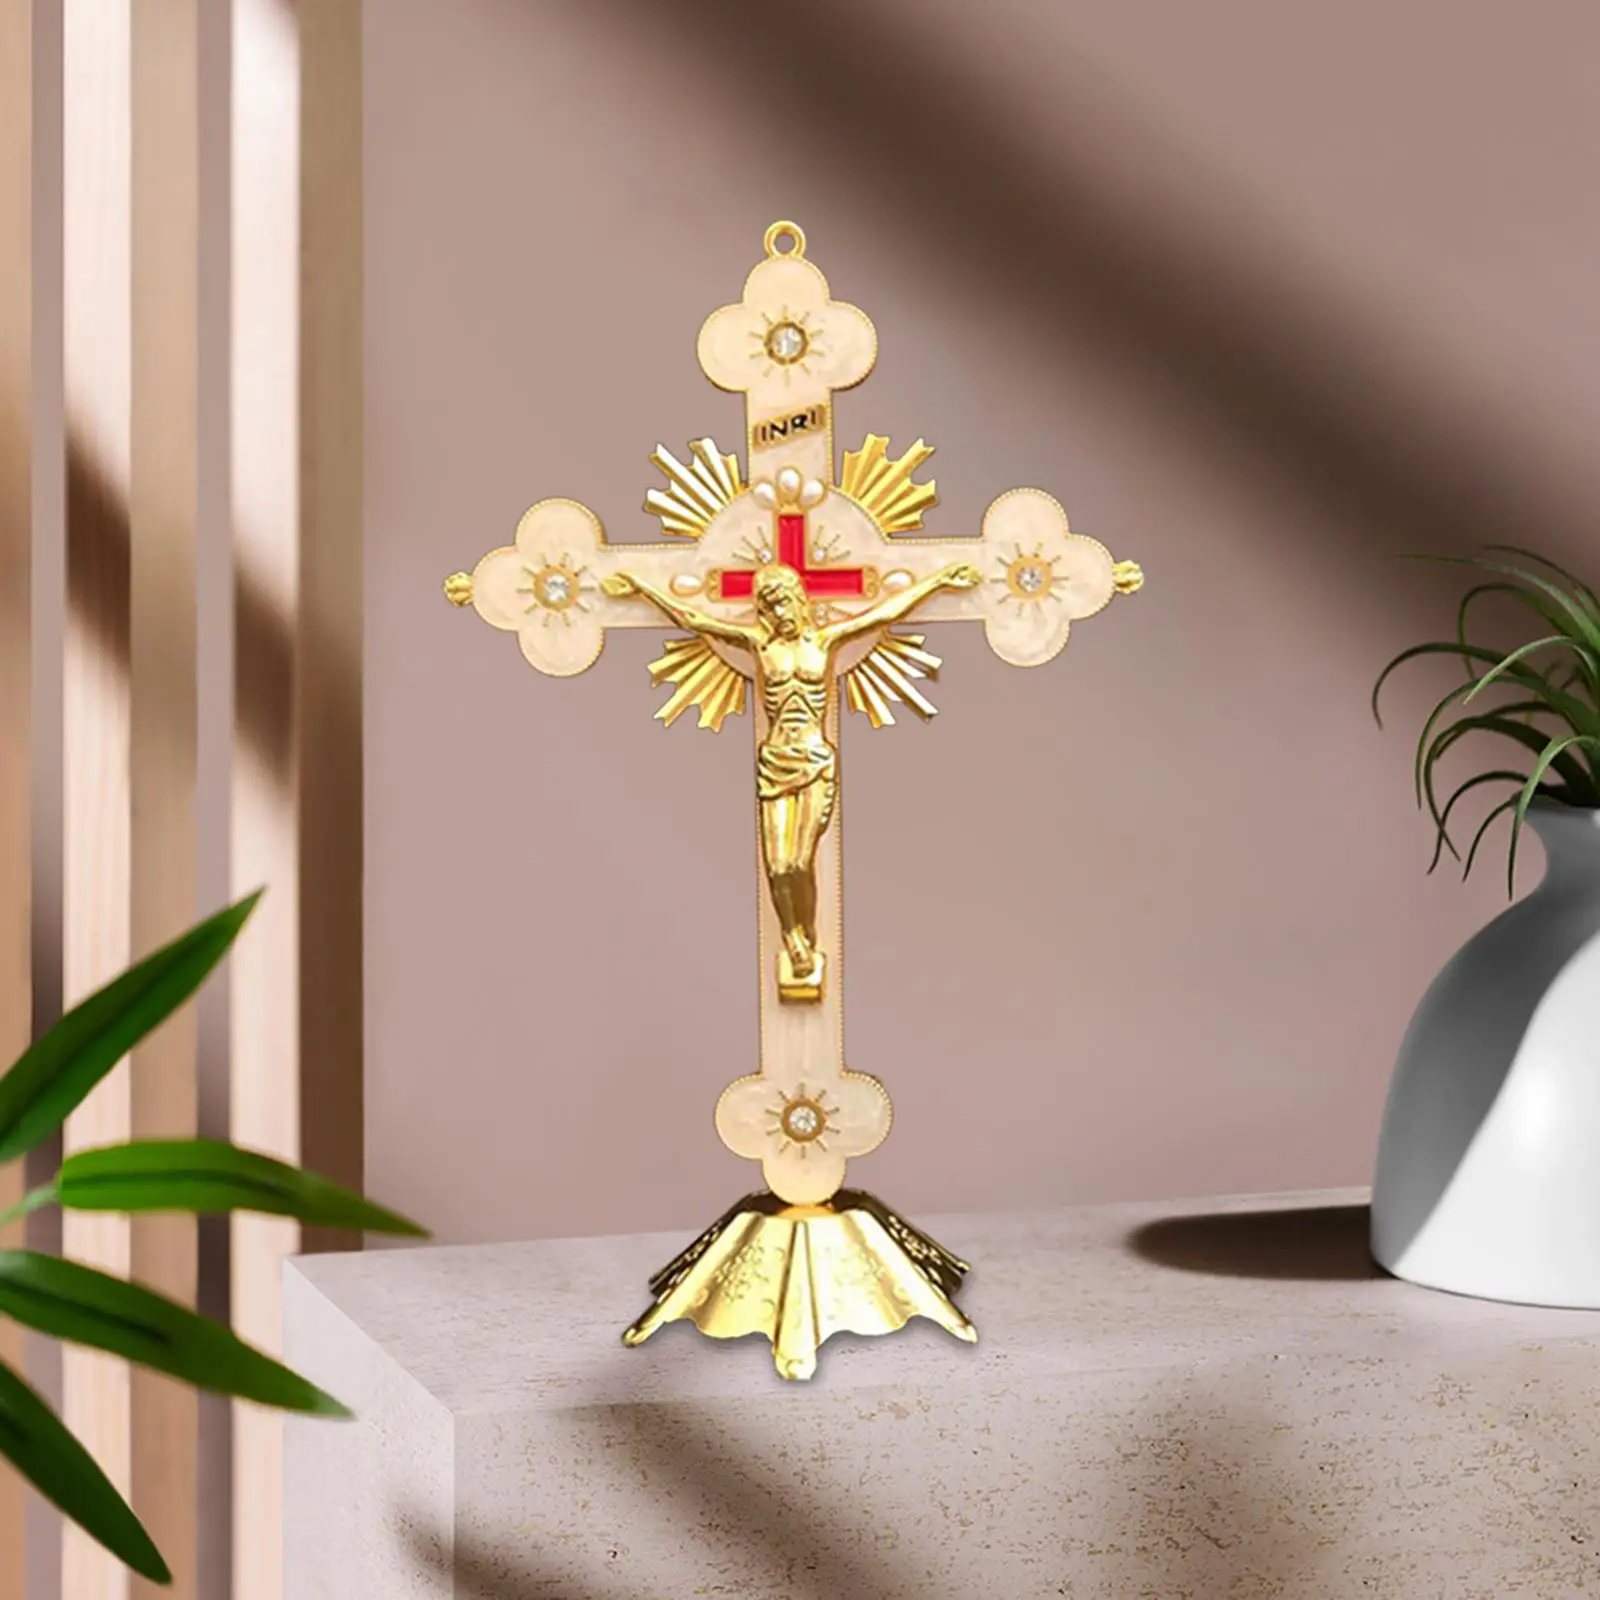 Standing Crucifix Collection Jesus Crucifix for Home Decor Table Chapel